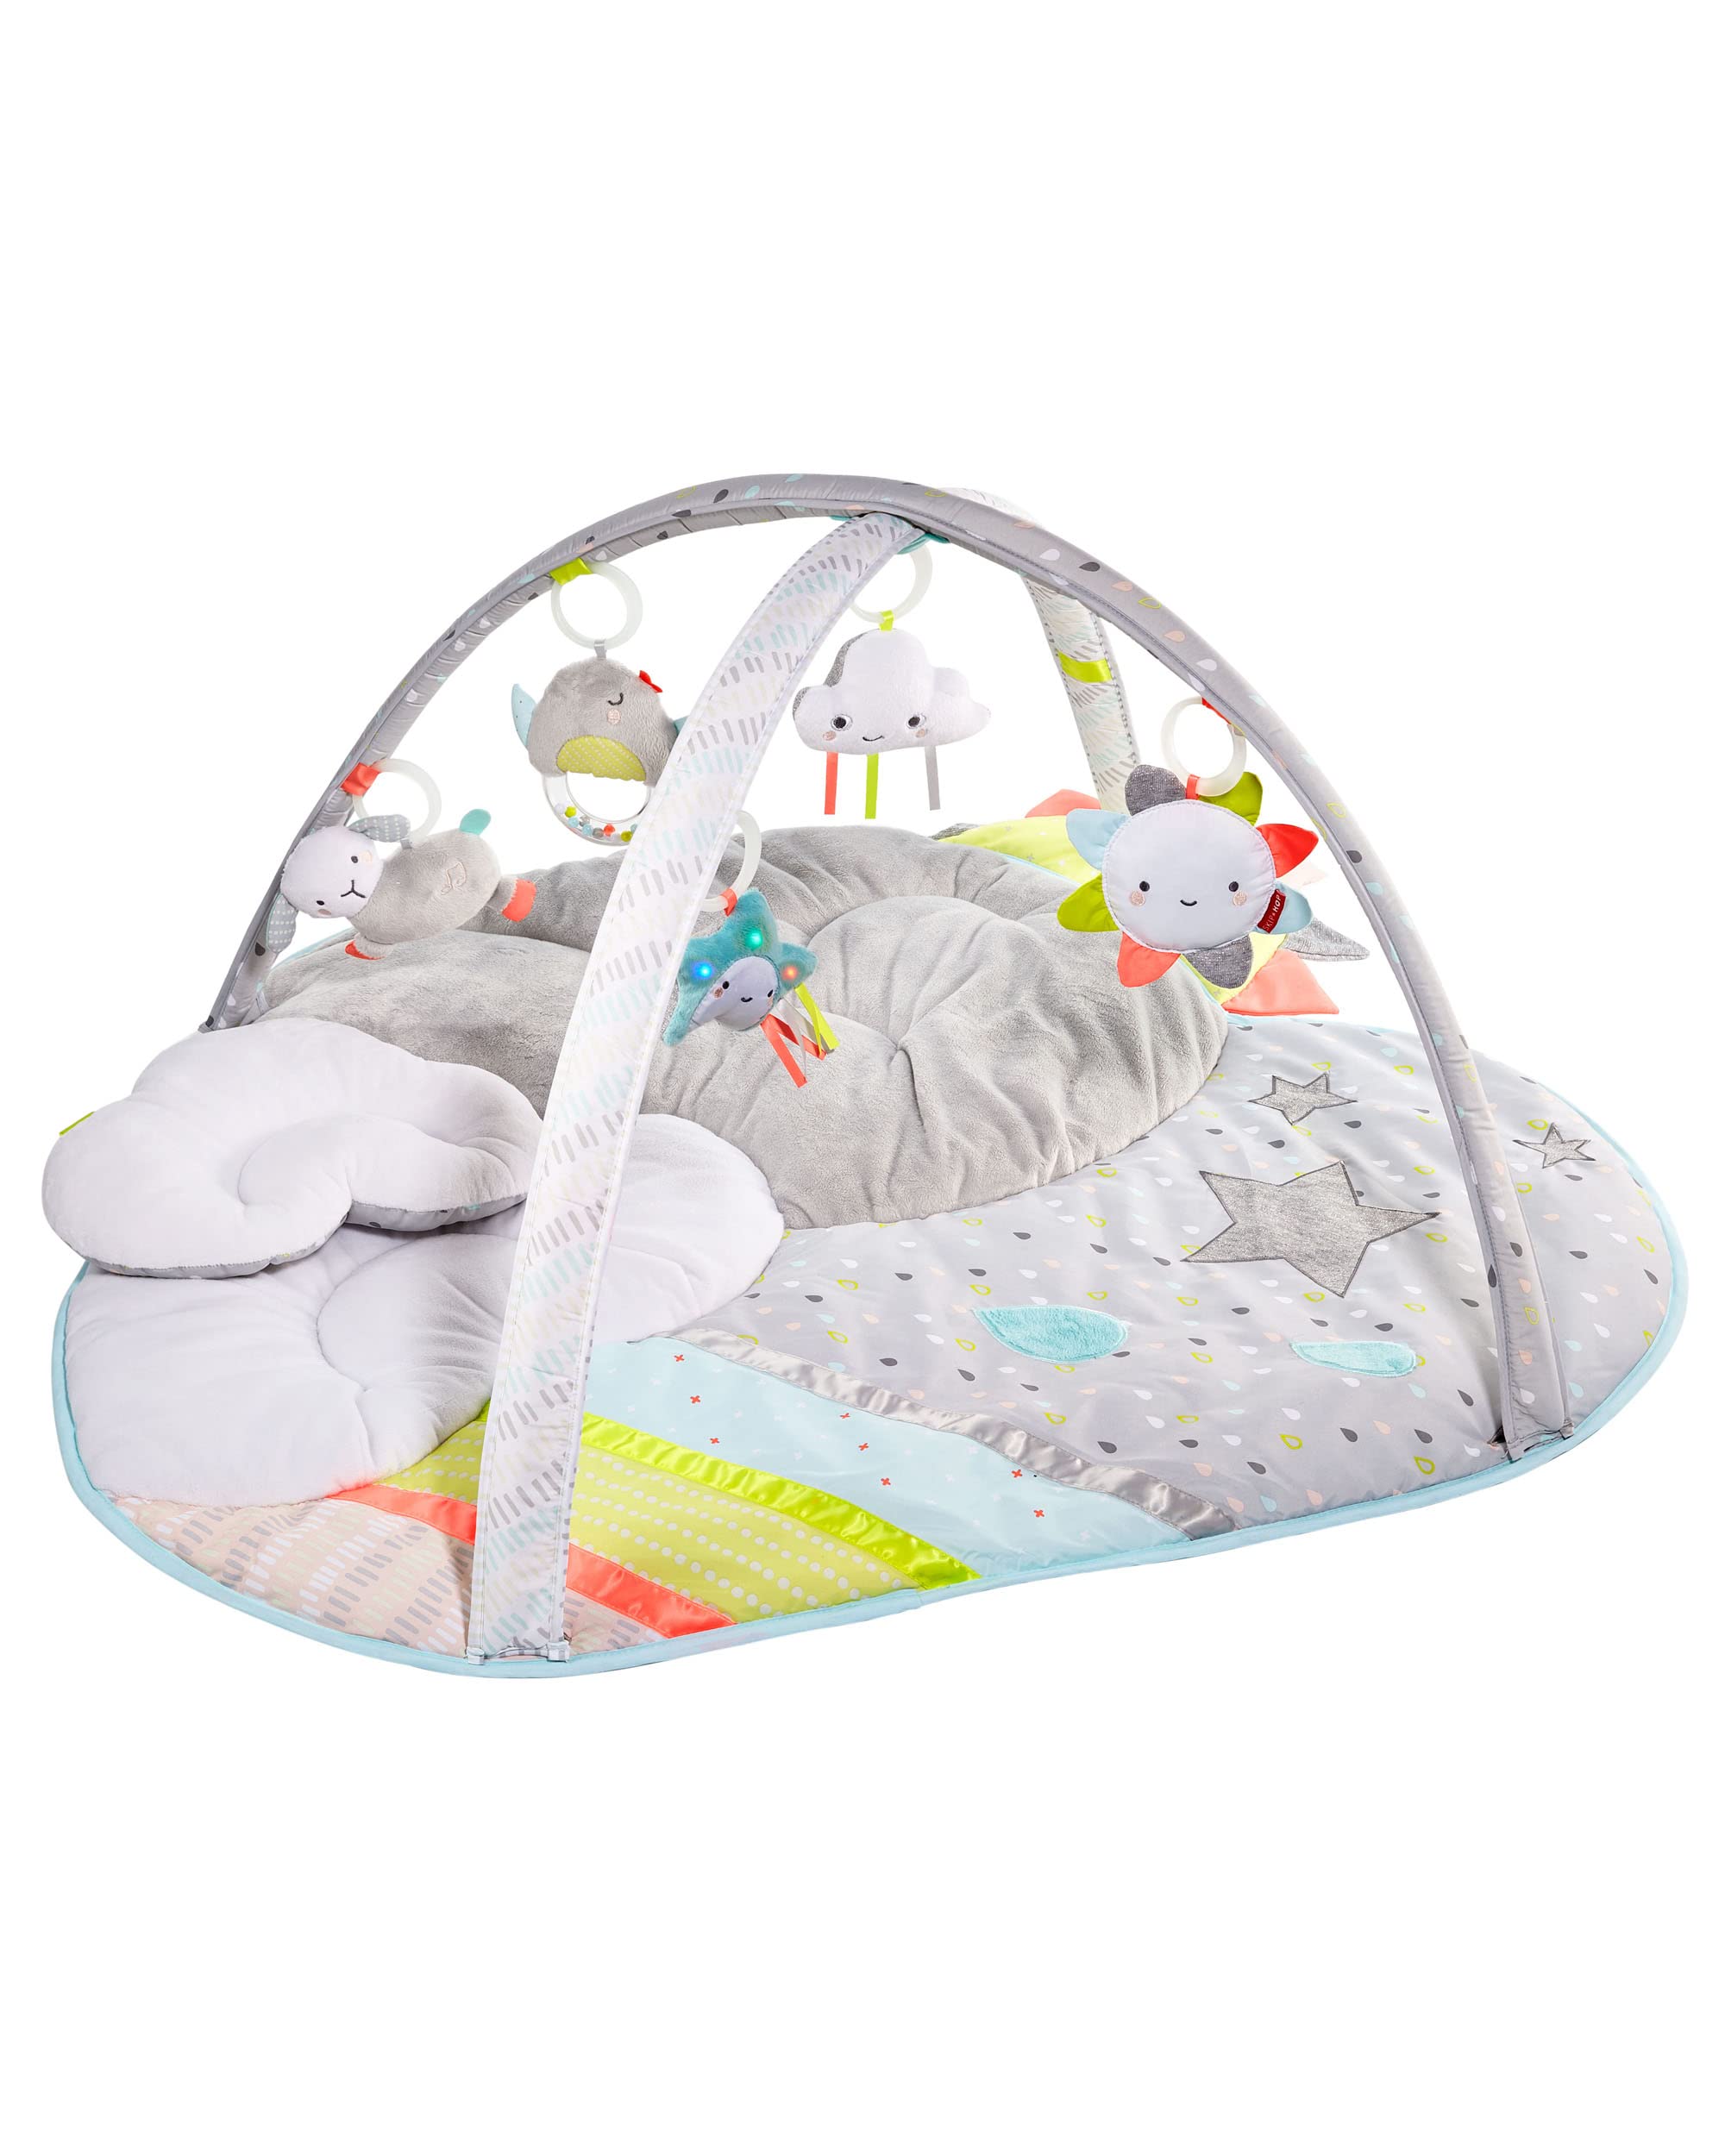 Skip Hop Baby Play Gym and Infant Playmat, Silver Lining Cloud, Grey